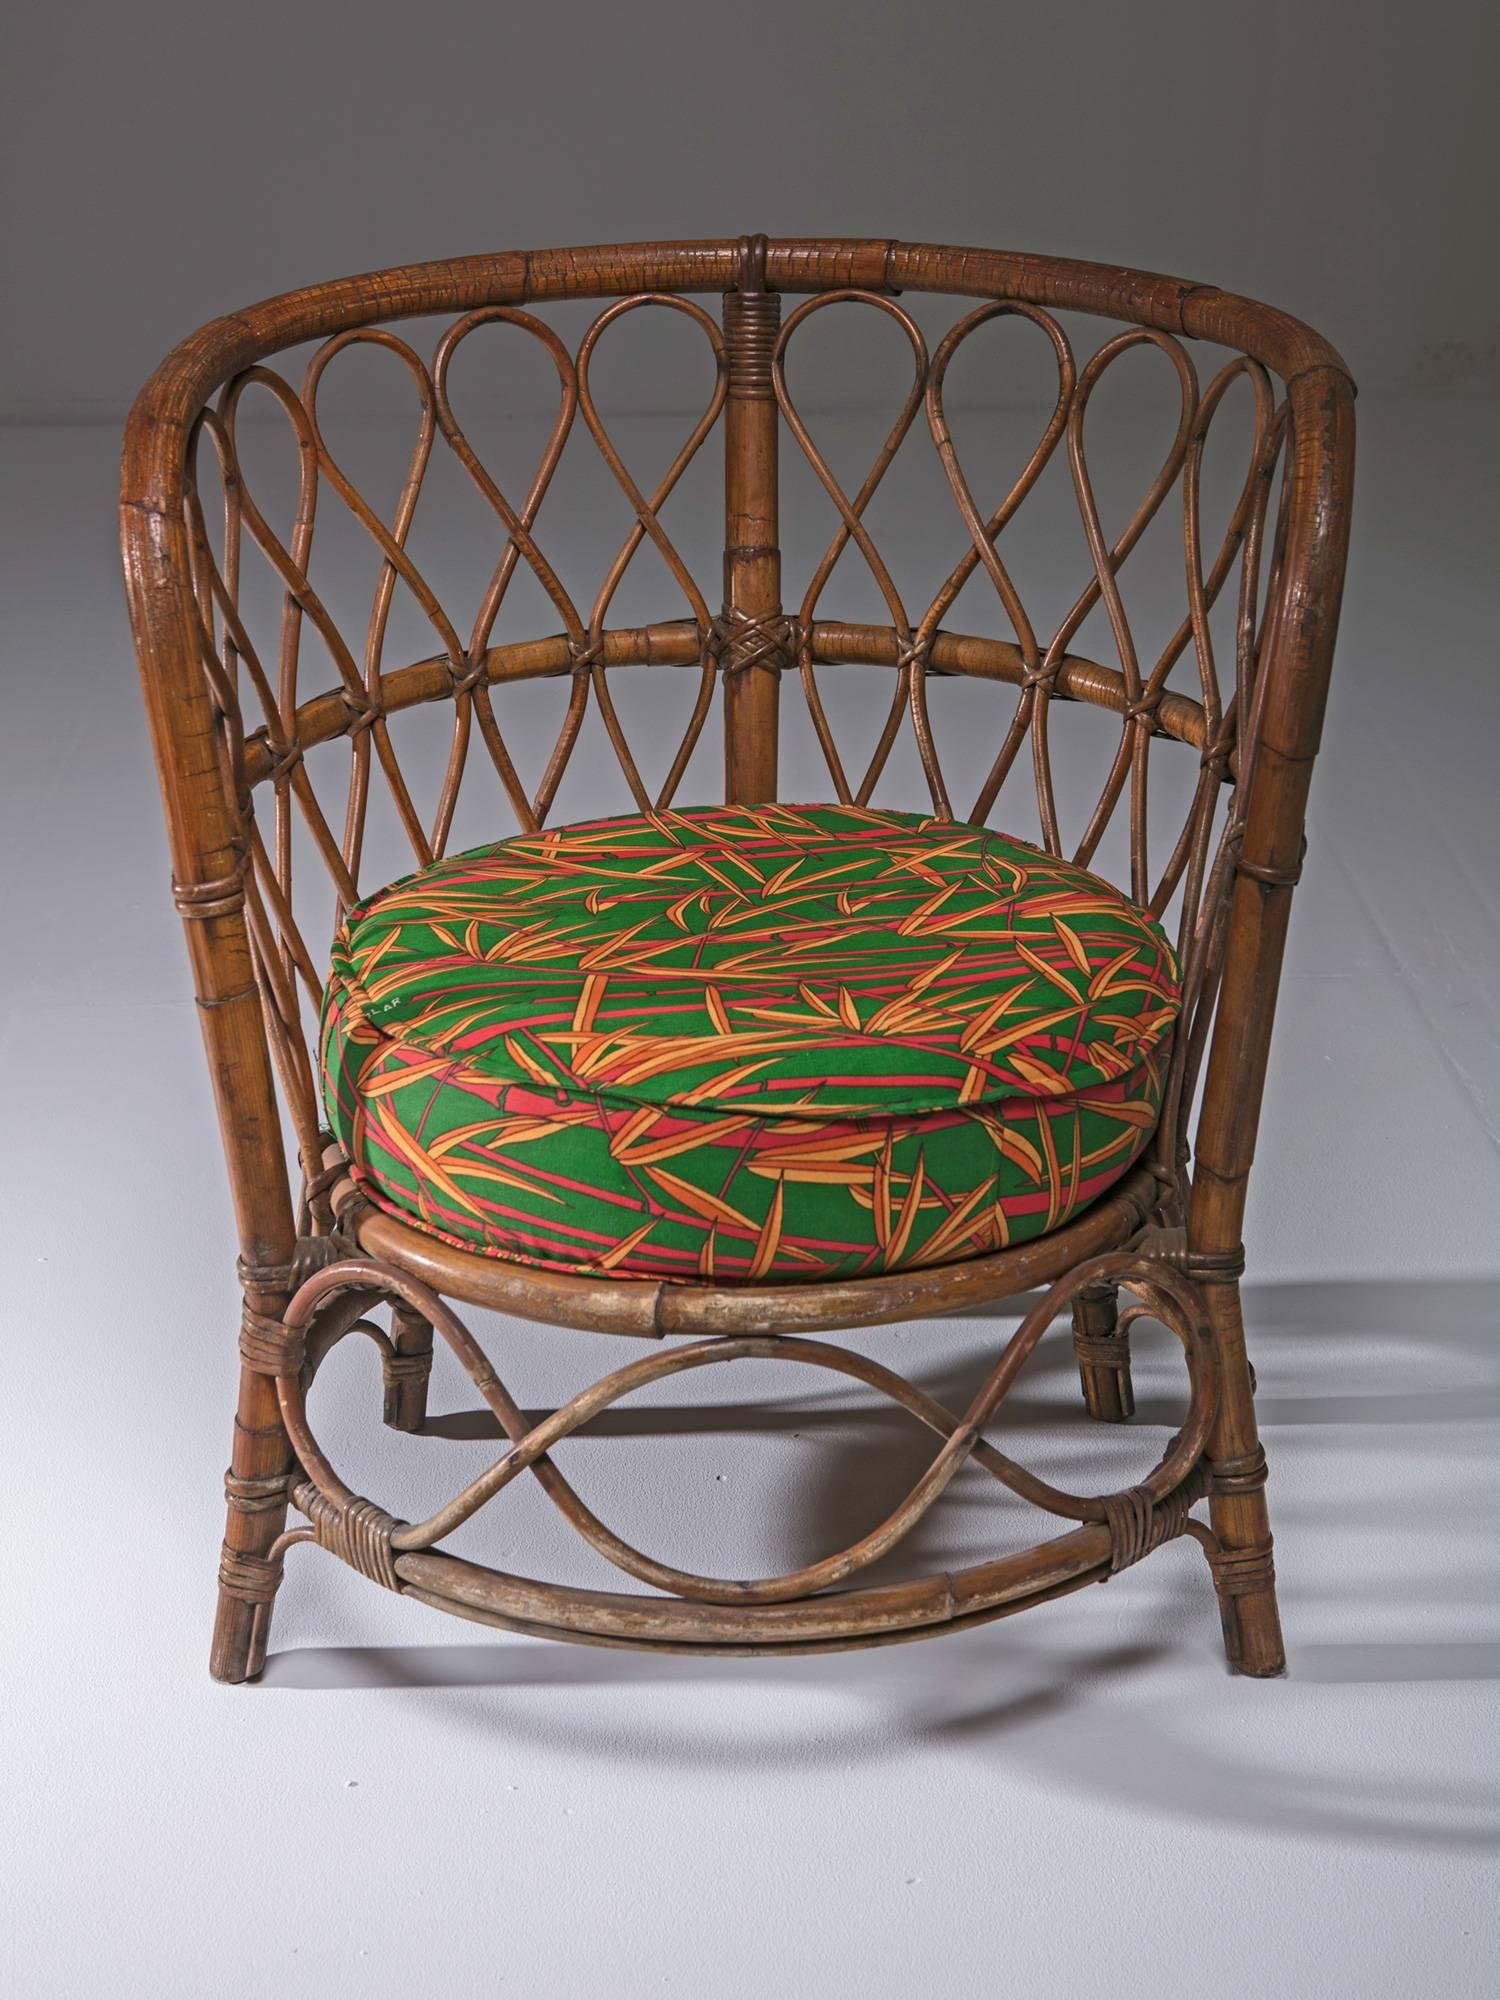 Compact wicker chairs with original upholstery.